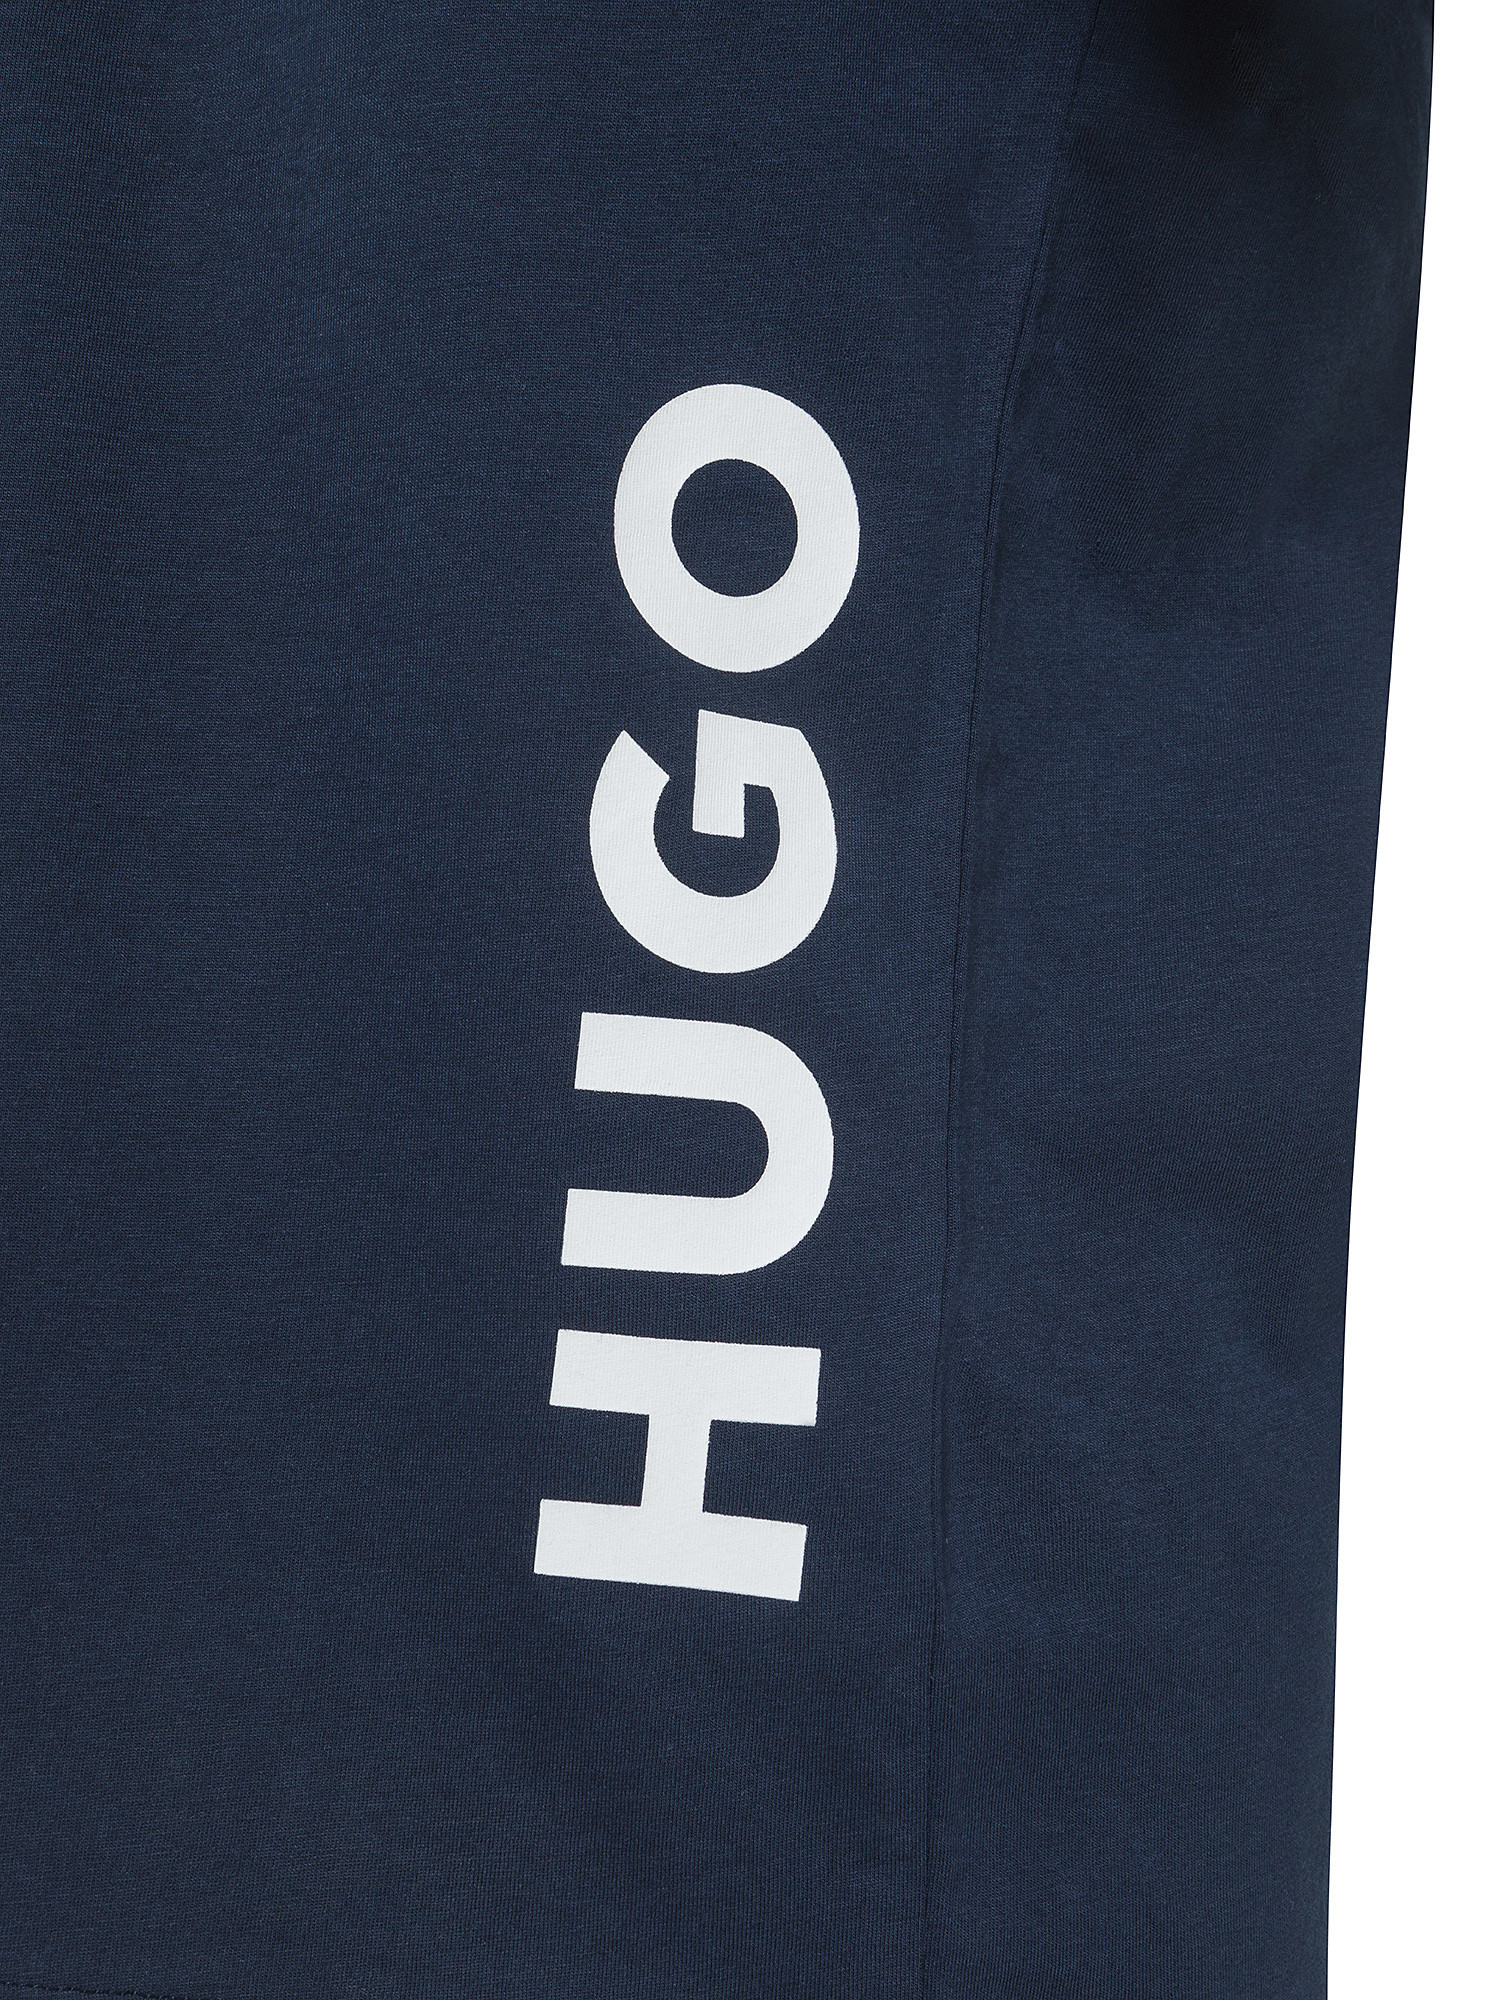 Hugo - T-shirt con stampa logo in cotone, Blu scuro, large image number 2